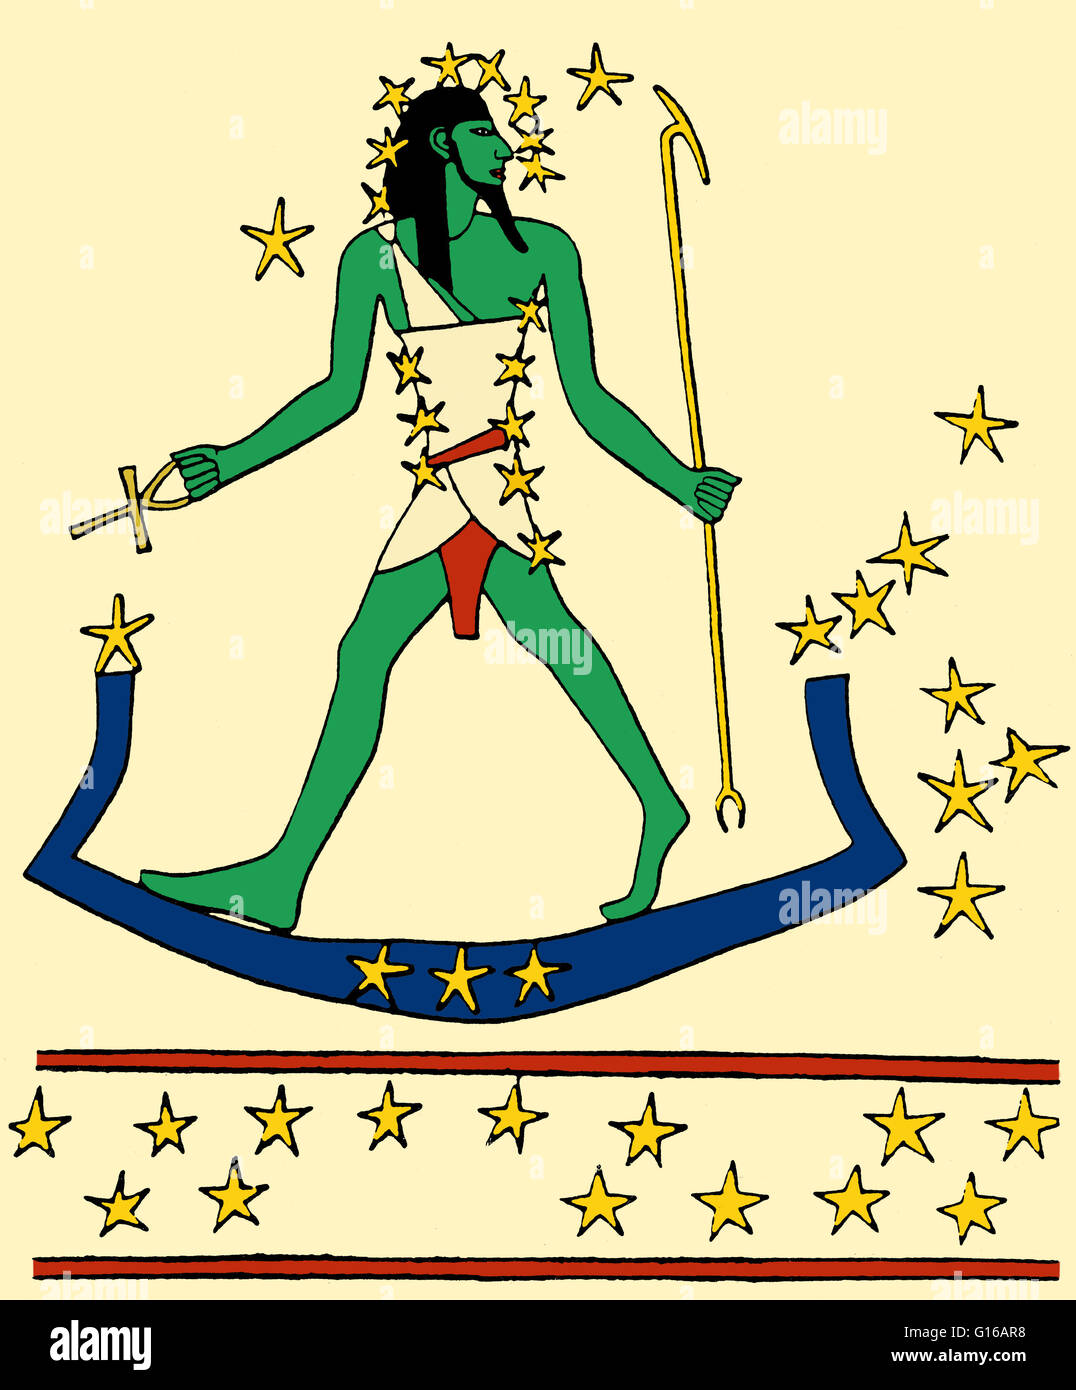 Osiris-Orion travels across the sky on the sacred boat (stars of Lepus). Image based on a star map in the tomb of Montemhet at Luxor, circa 650 BC. The stars of Orion were associated with Osiris, the sun-god of rebirth and afterlife, by the ancient Egypti Stock Photo